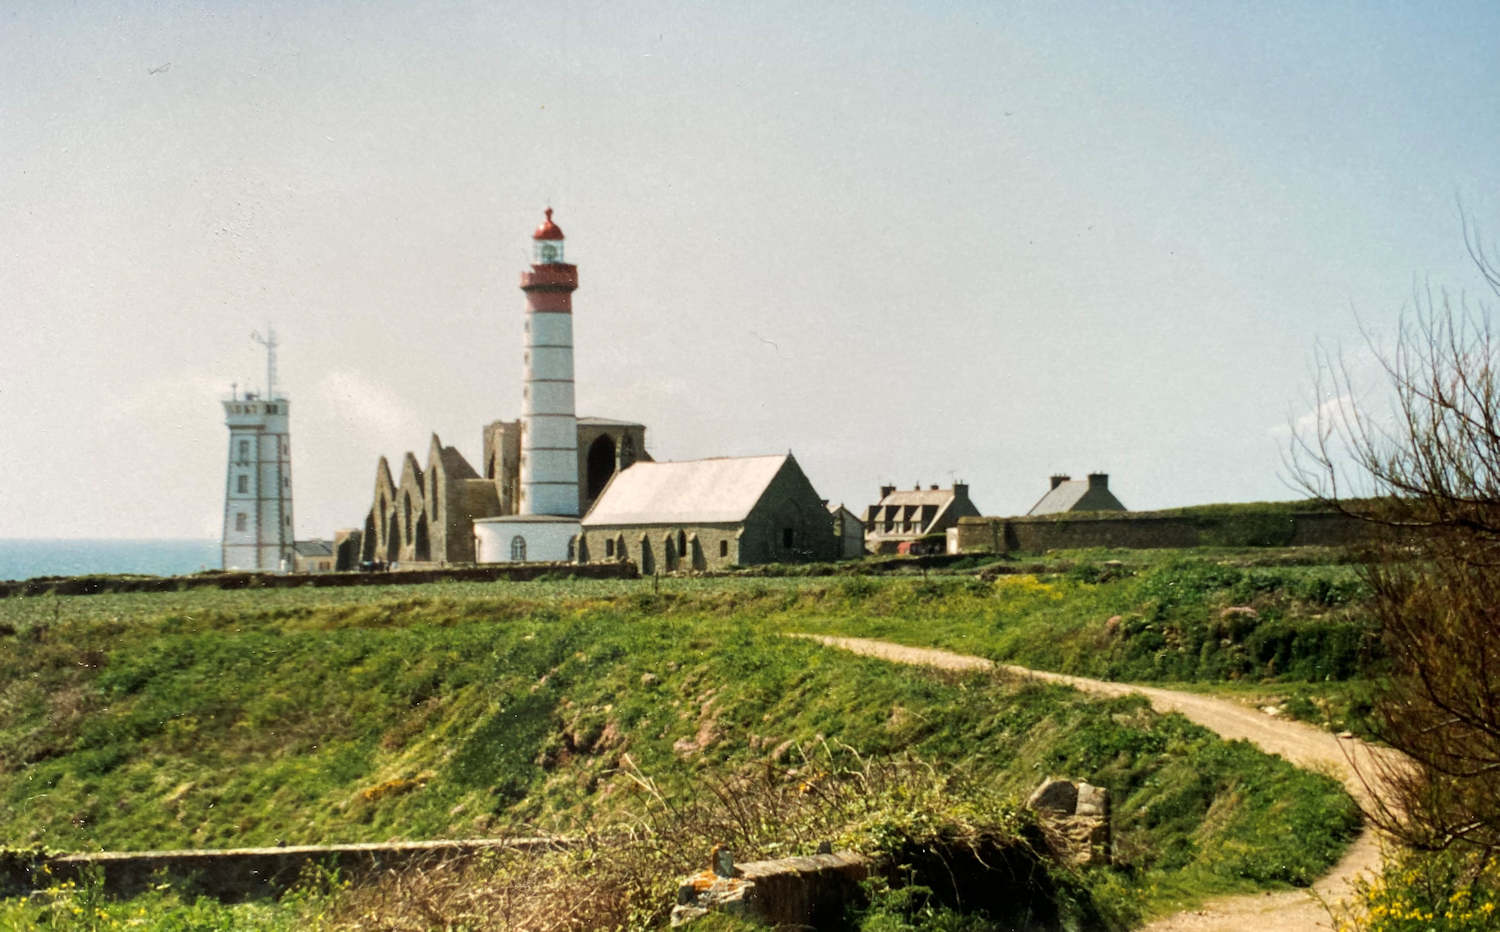 Finistere (Brittany) lighthouse, potato article. Francesca Cannan